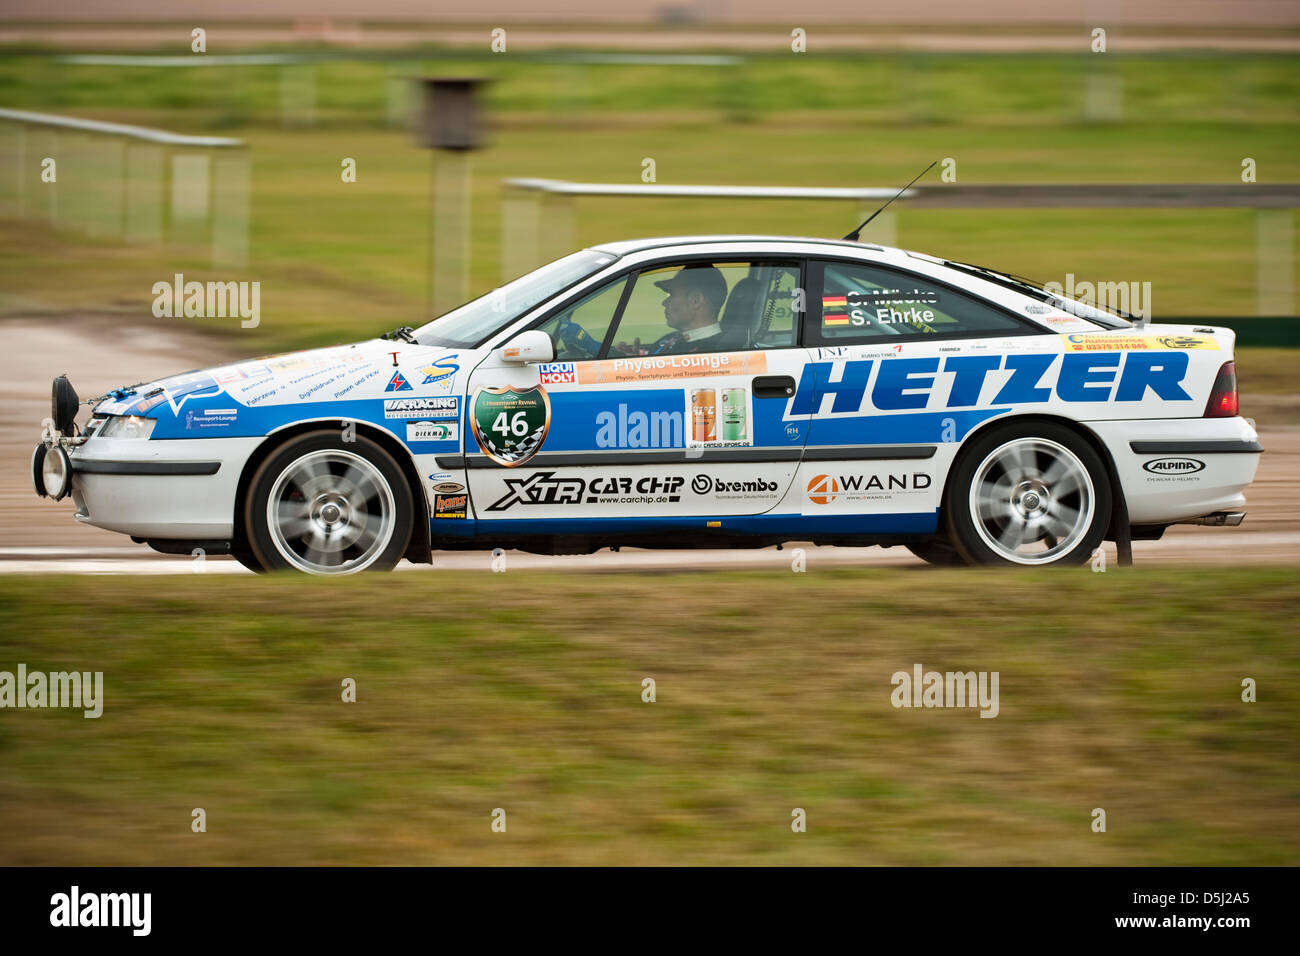 A Opel Calibra Turbo is pictured as part of the first 'Revival Berlin' autumn classic car rally at the Mariendorf harness racing track in Berlin, Germany, 10 November 2012. Over 50 classic vehicles race for record times. Photo: Robert Schlesinger Stock Photo